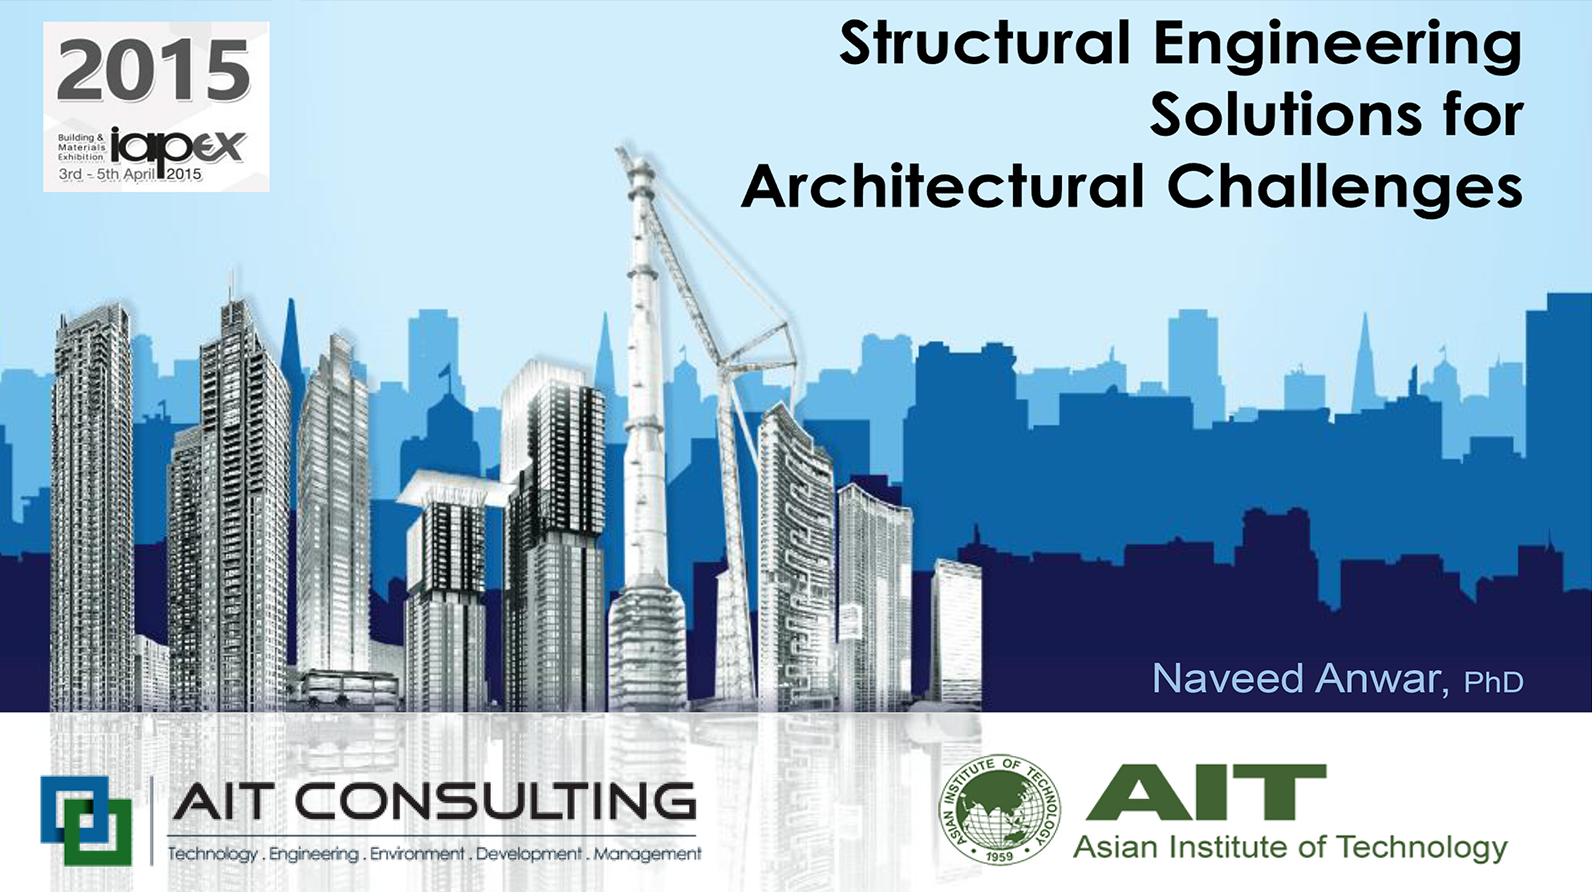 Structural Engineering Solutions for Architectural Challenges